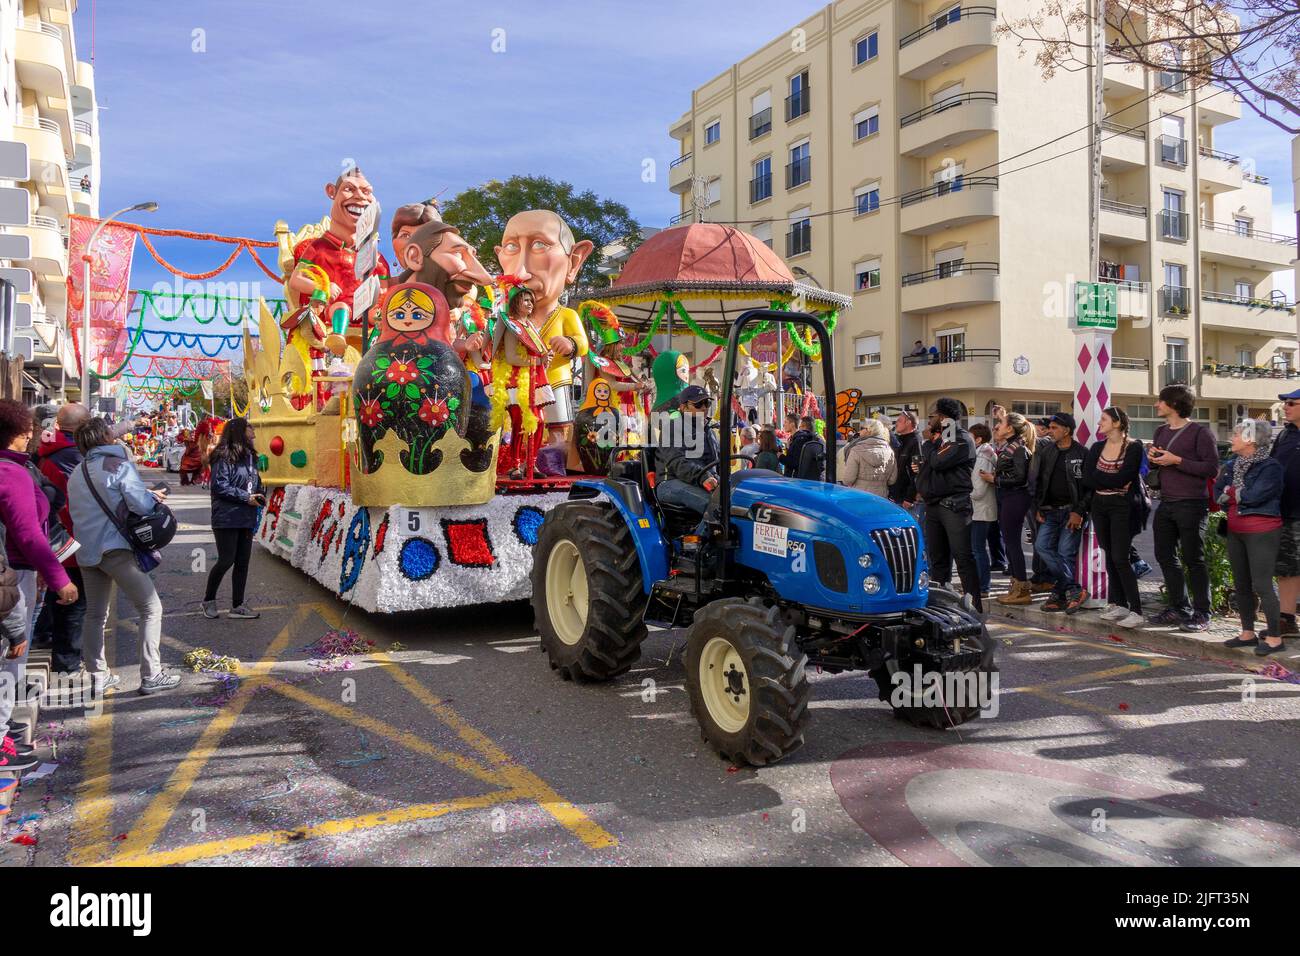 FEBRUARY 12, 2018, LOULE, PORTUGAL: Carnaval Float with 2018 World Cup In Russia With Cristiano Ronaldo Portugal Football Team Stock Photo